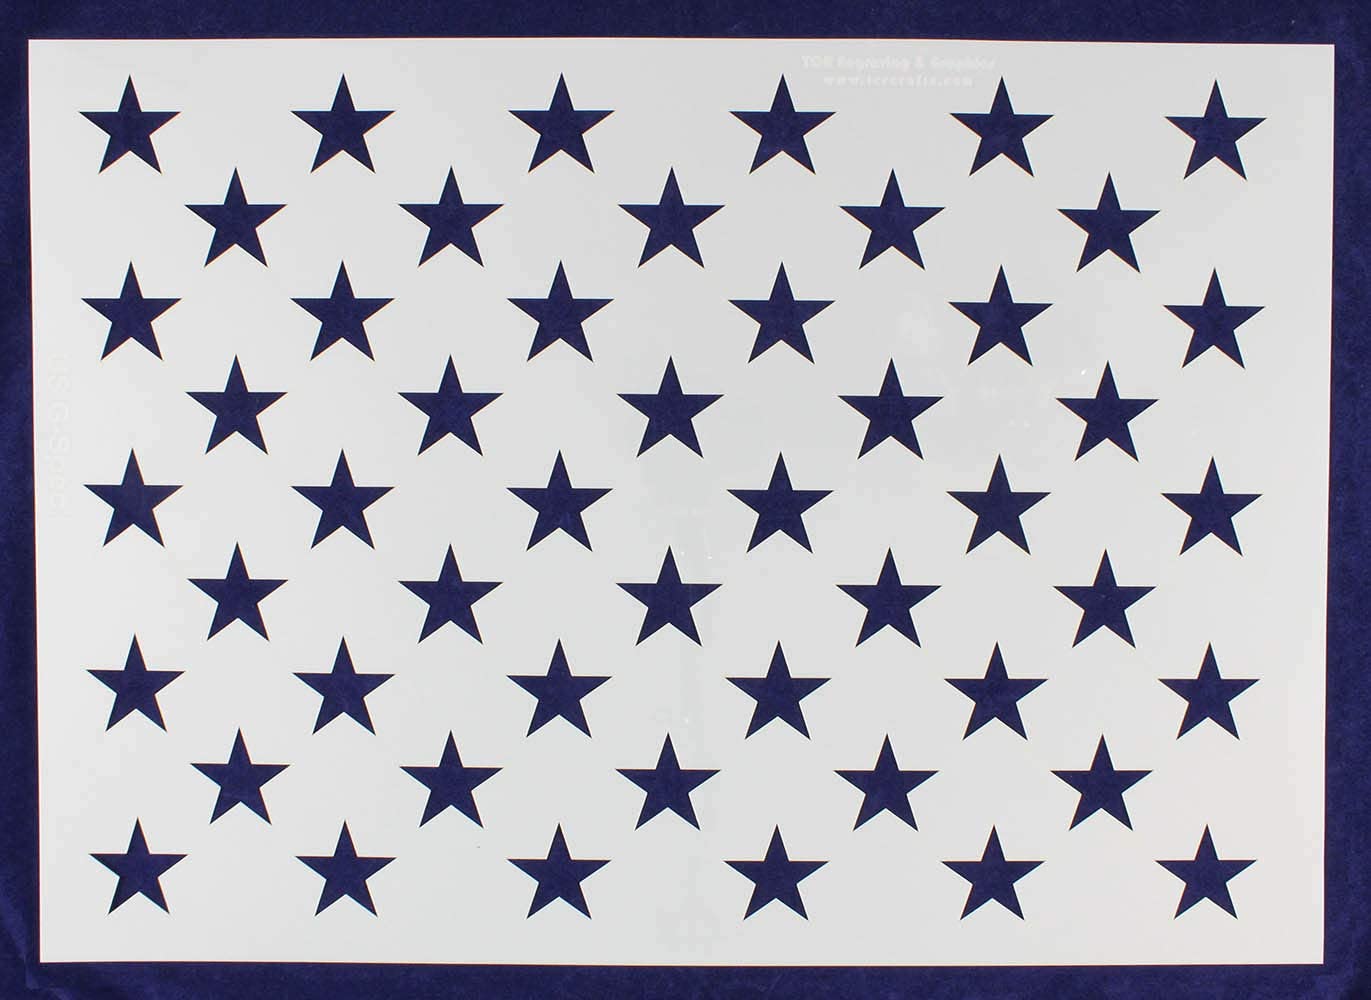 10x15in American Flag 50 Star Stencil Template, Stainless Steel